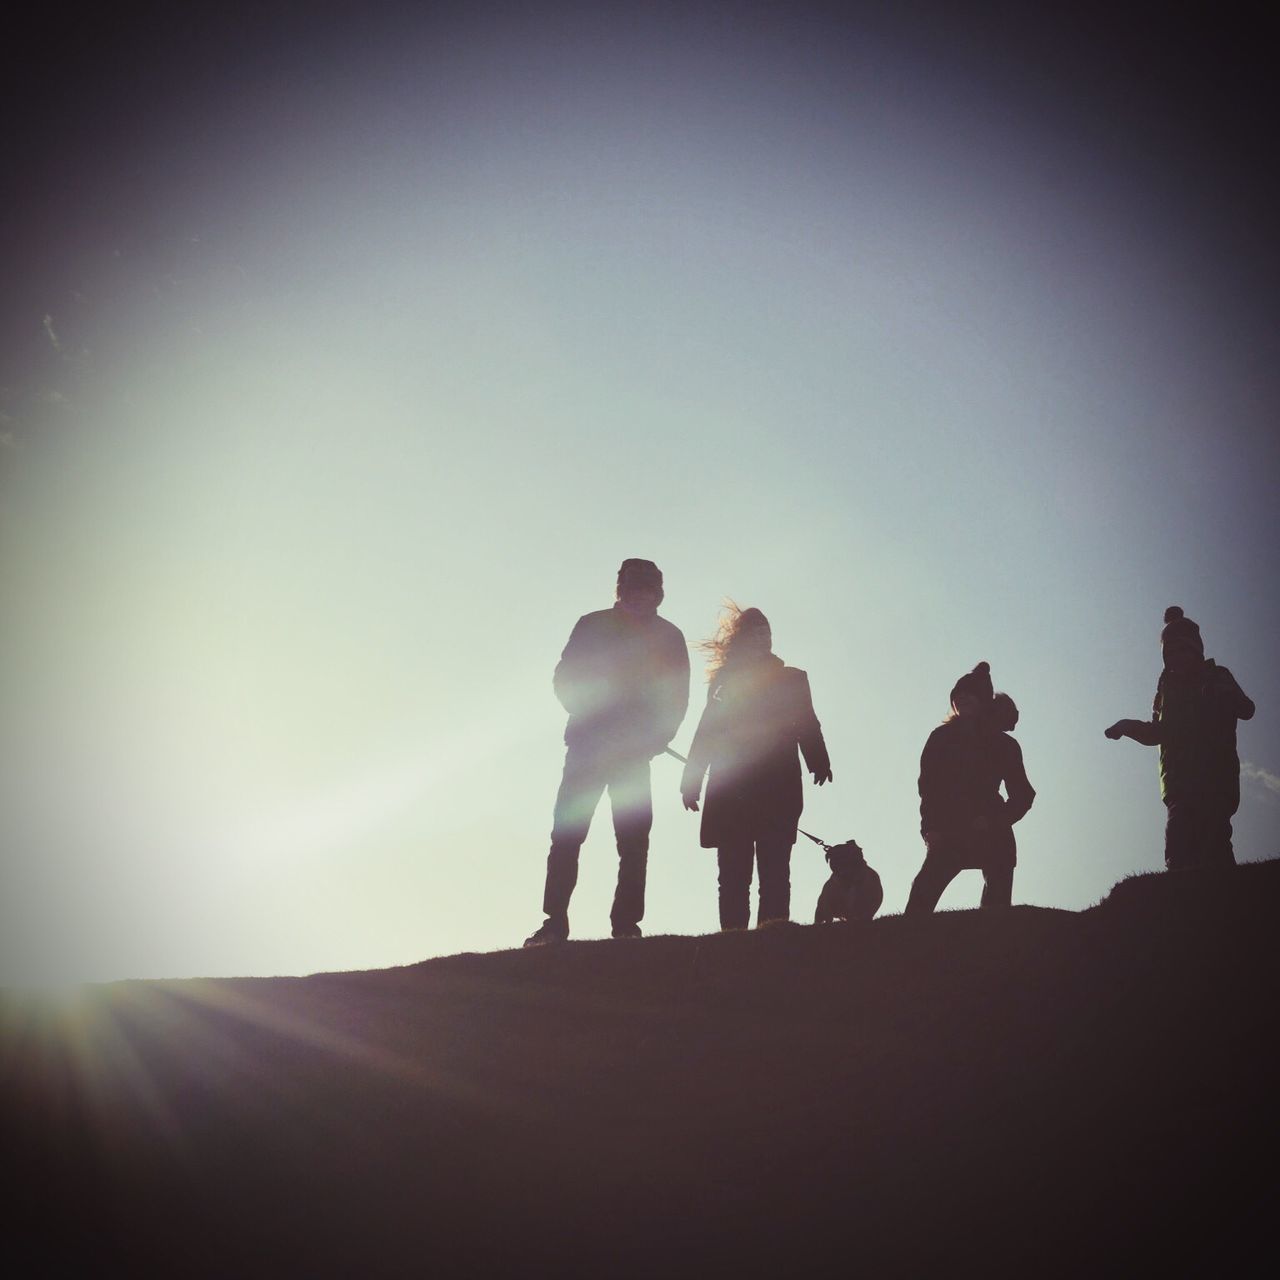 togetherness, silhouette, copy space, lifestyles, full length, men, leisure activity, clear sky, friendship, mountain, solitude, tranquility, nature, outdoors, remote, person, sky, tranquil scene, scenics